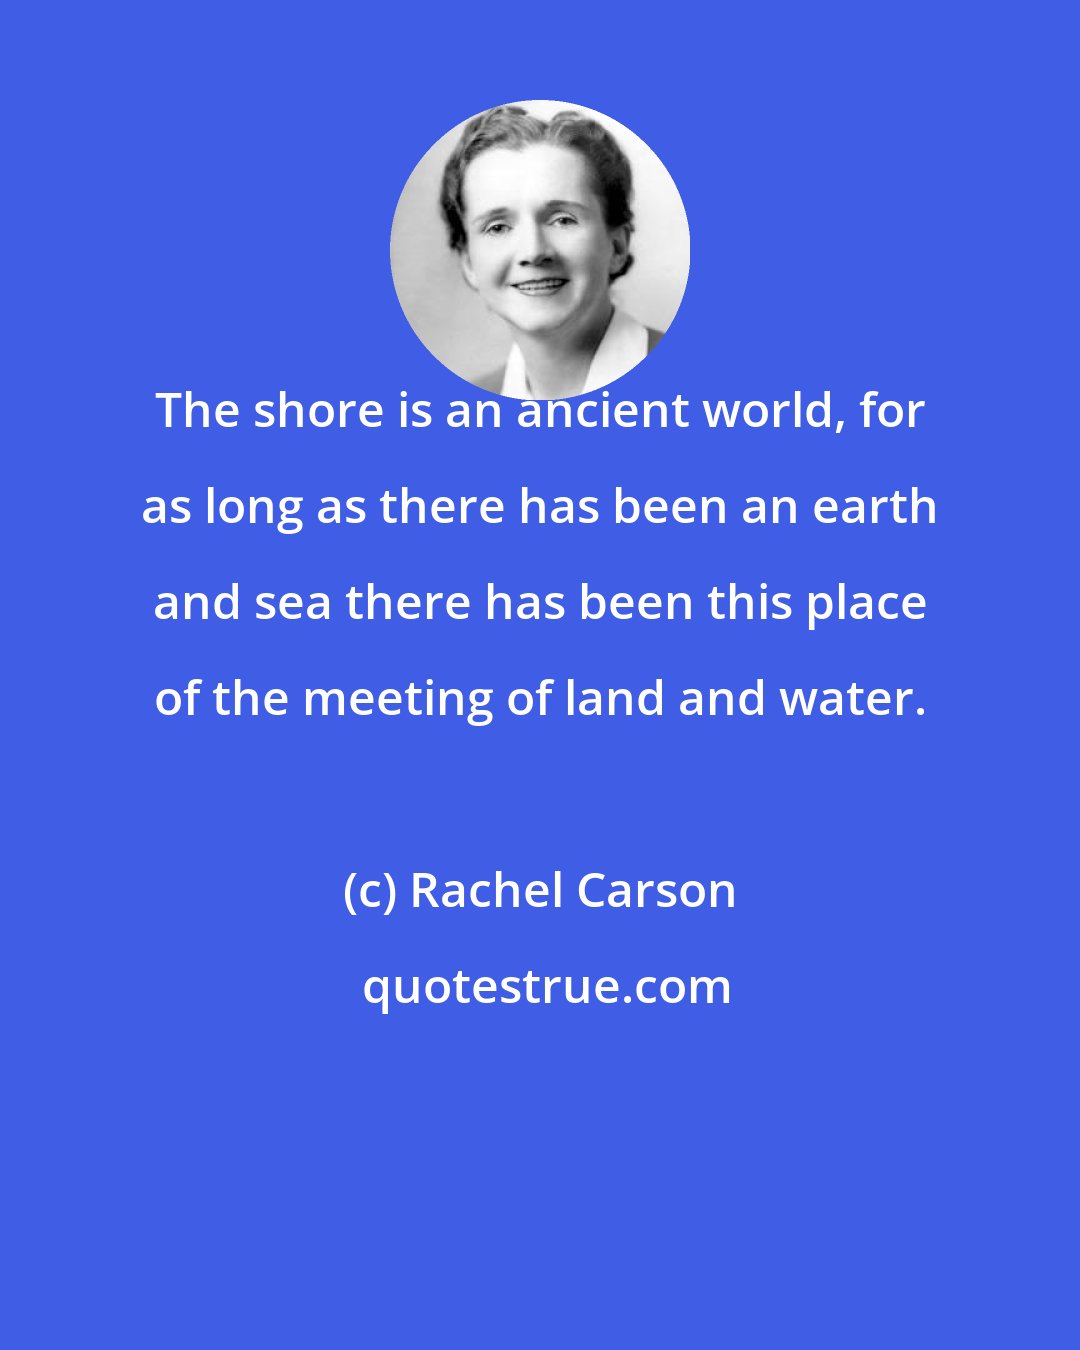 Rachel Carson: The shore is an ancient world, for as long as there has been an earth and sea there has been this place of the meeting of land and water.